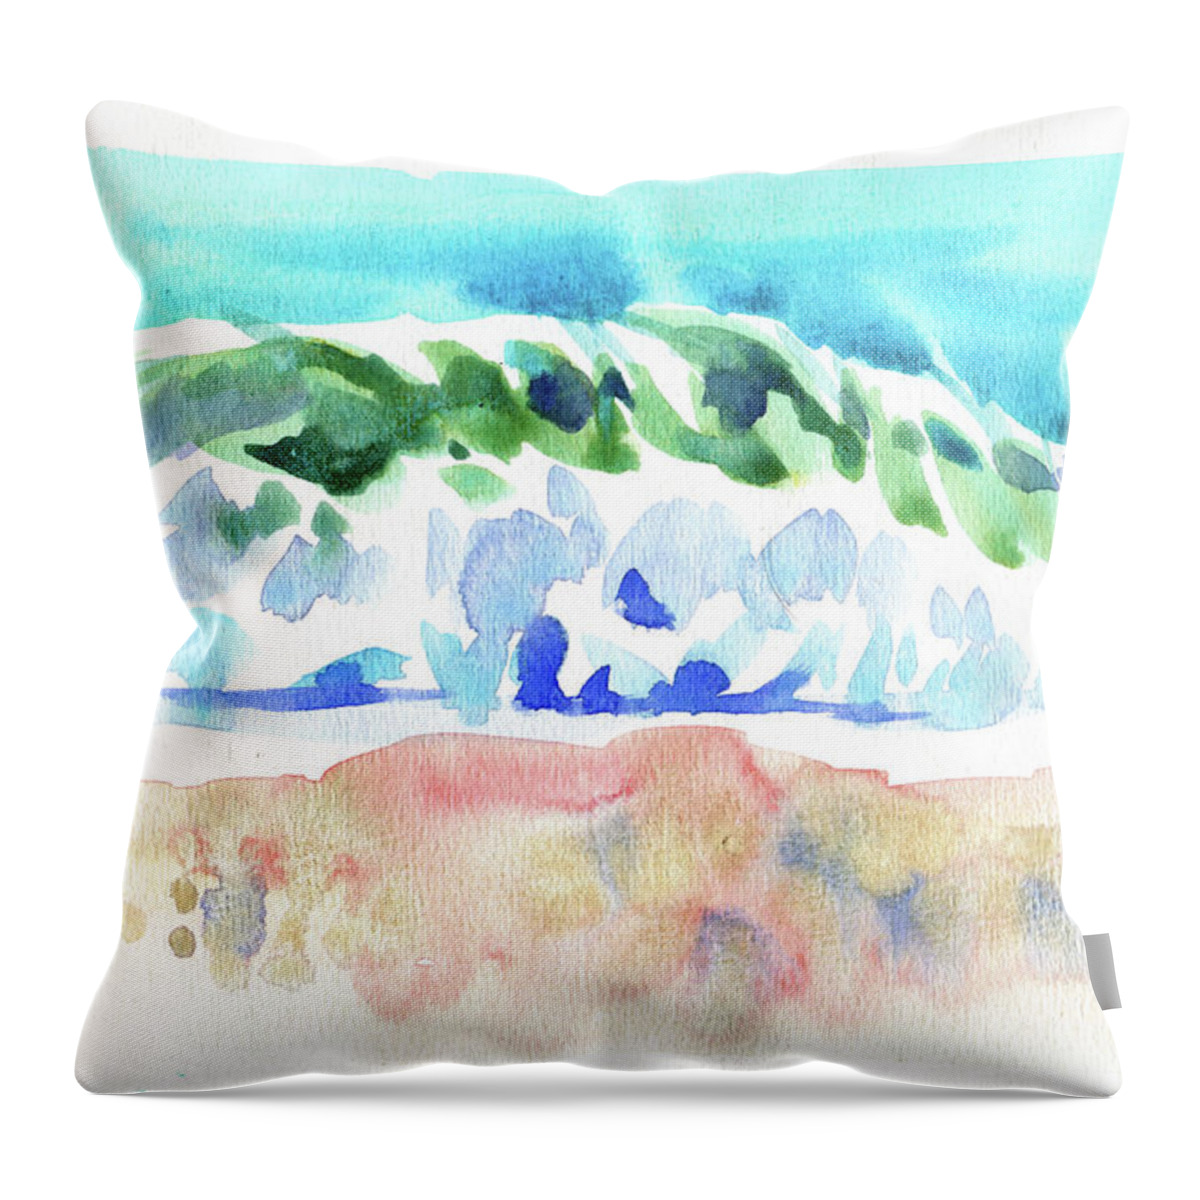 Watercolor Throw Pillow featuring the digital art Watercolor Wave On Sea Painting by Sambel Pedes